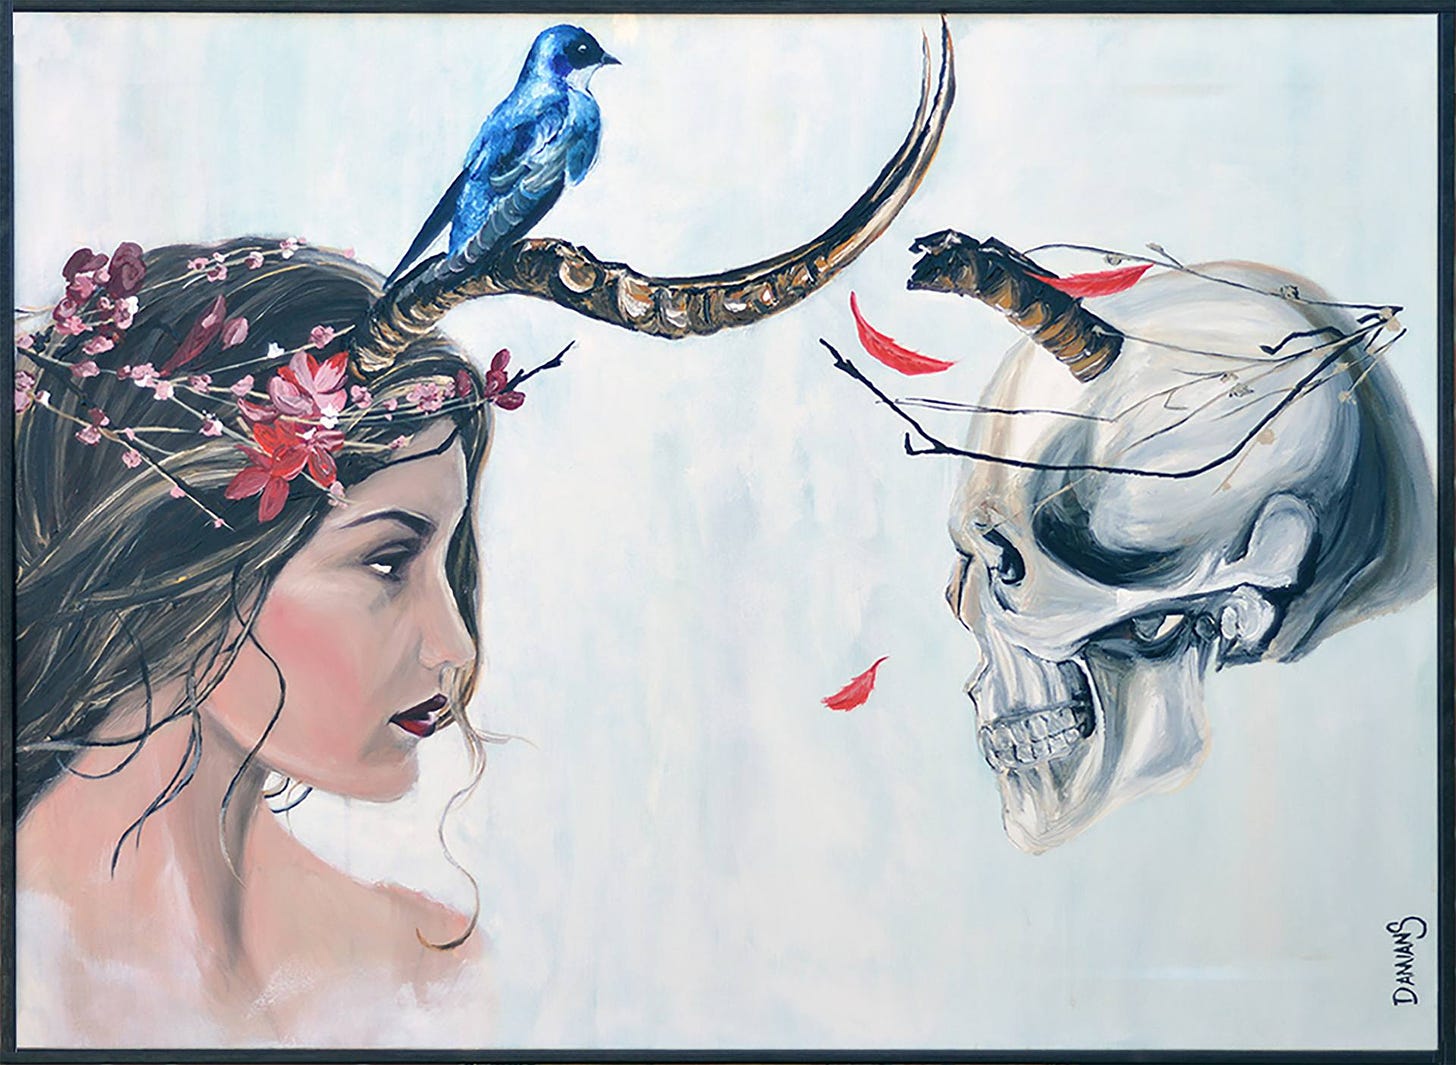 Beauty and Mortality Painting by Damian Smith | Saatchi Art